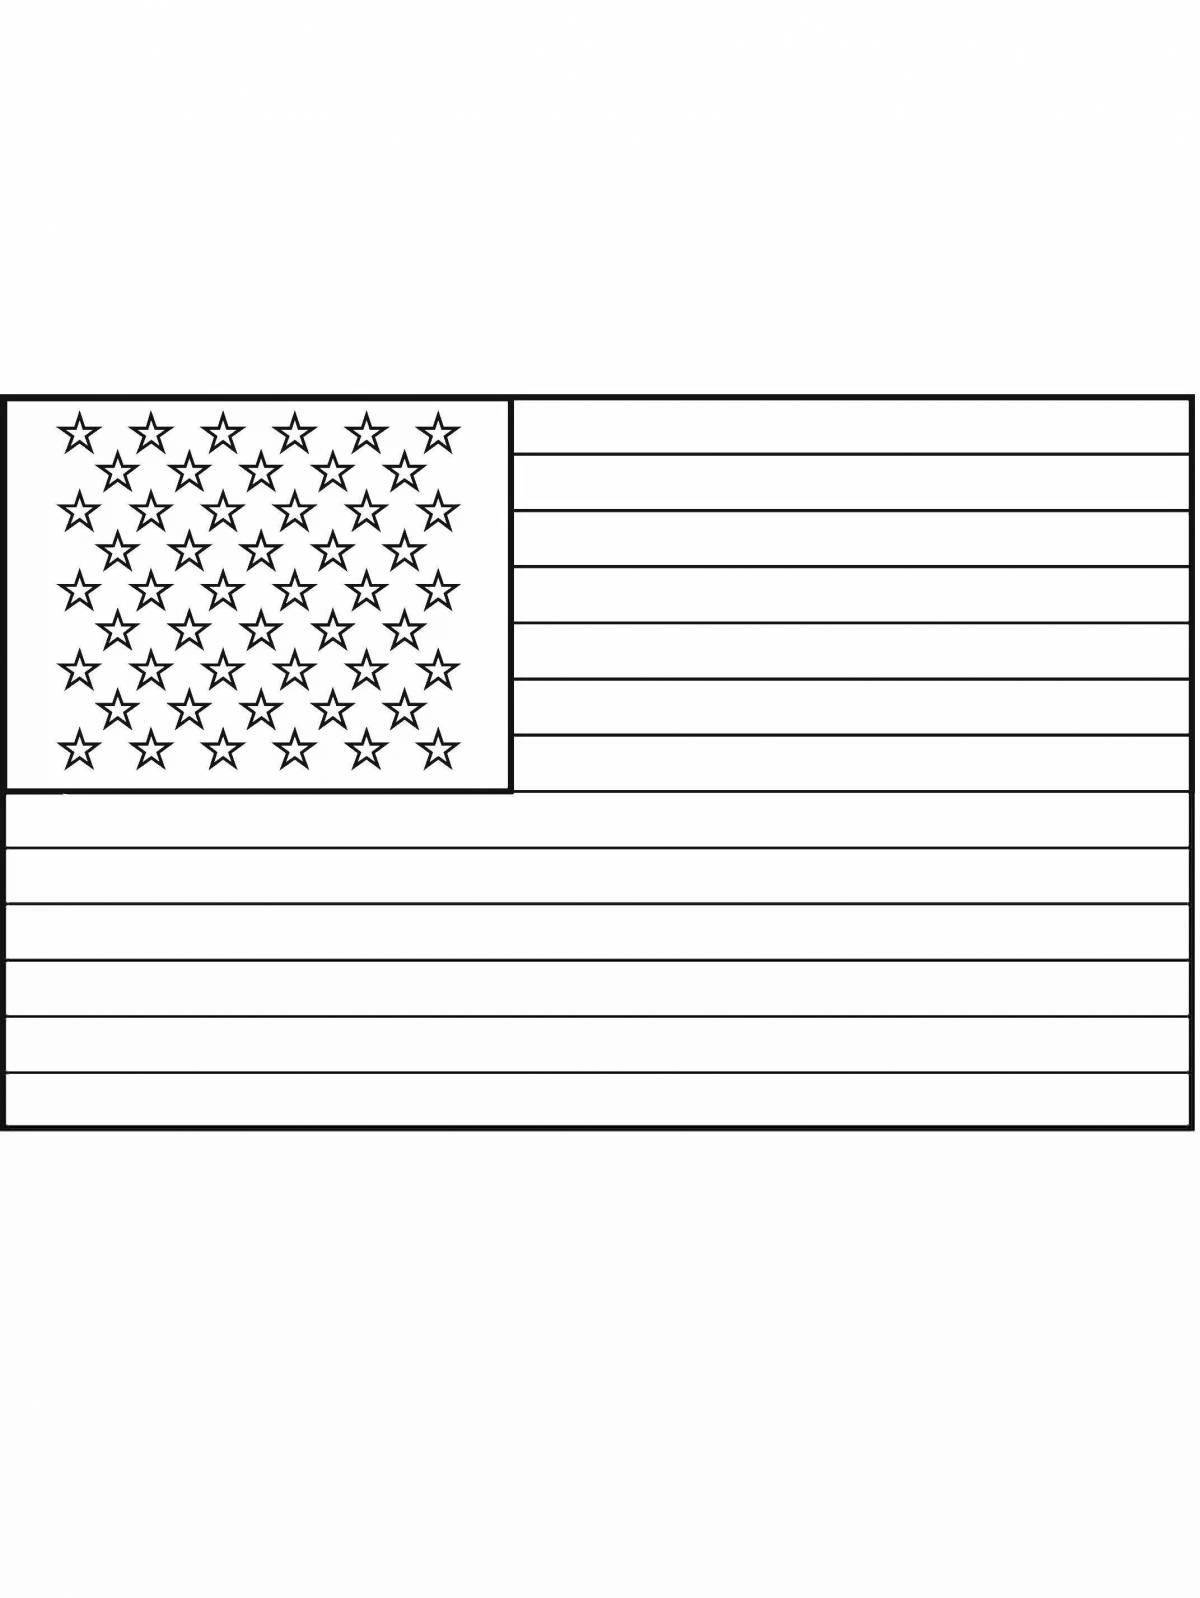 Coloring page deluxe usa flag